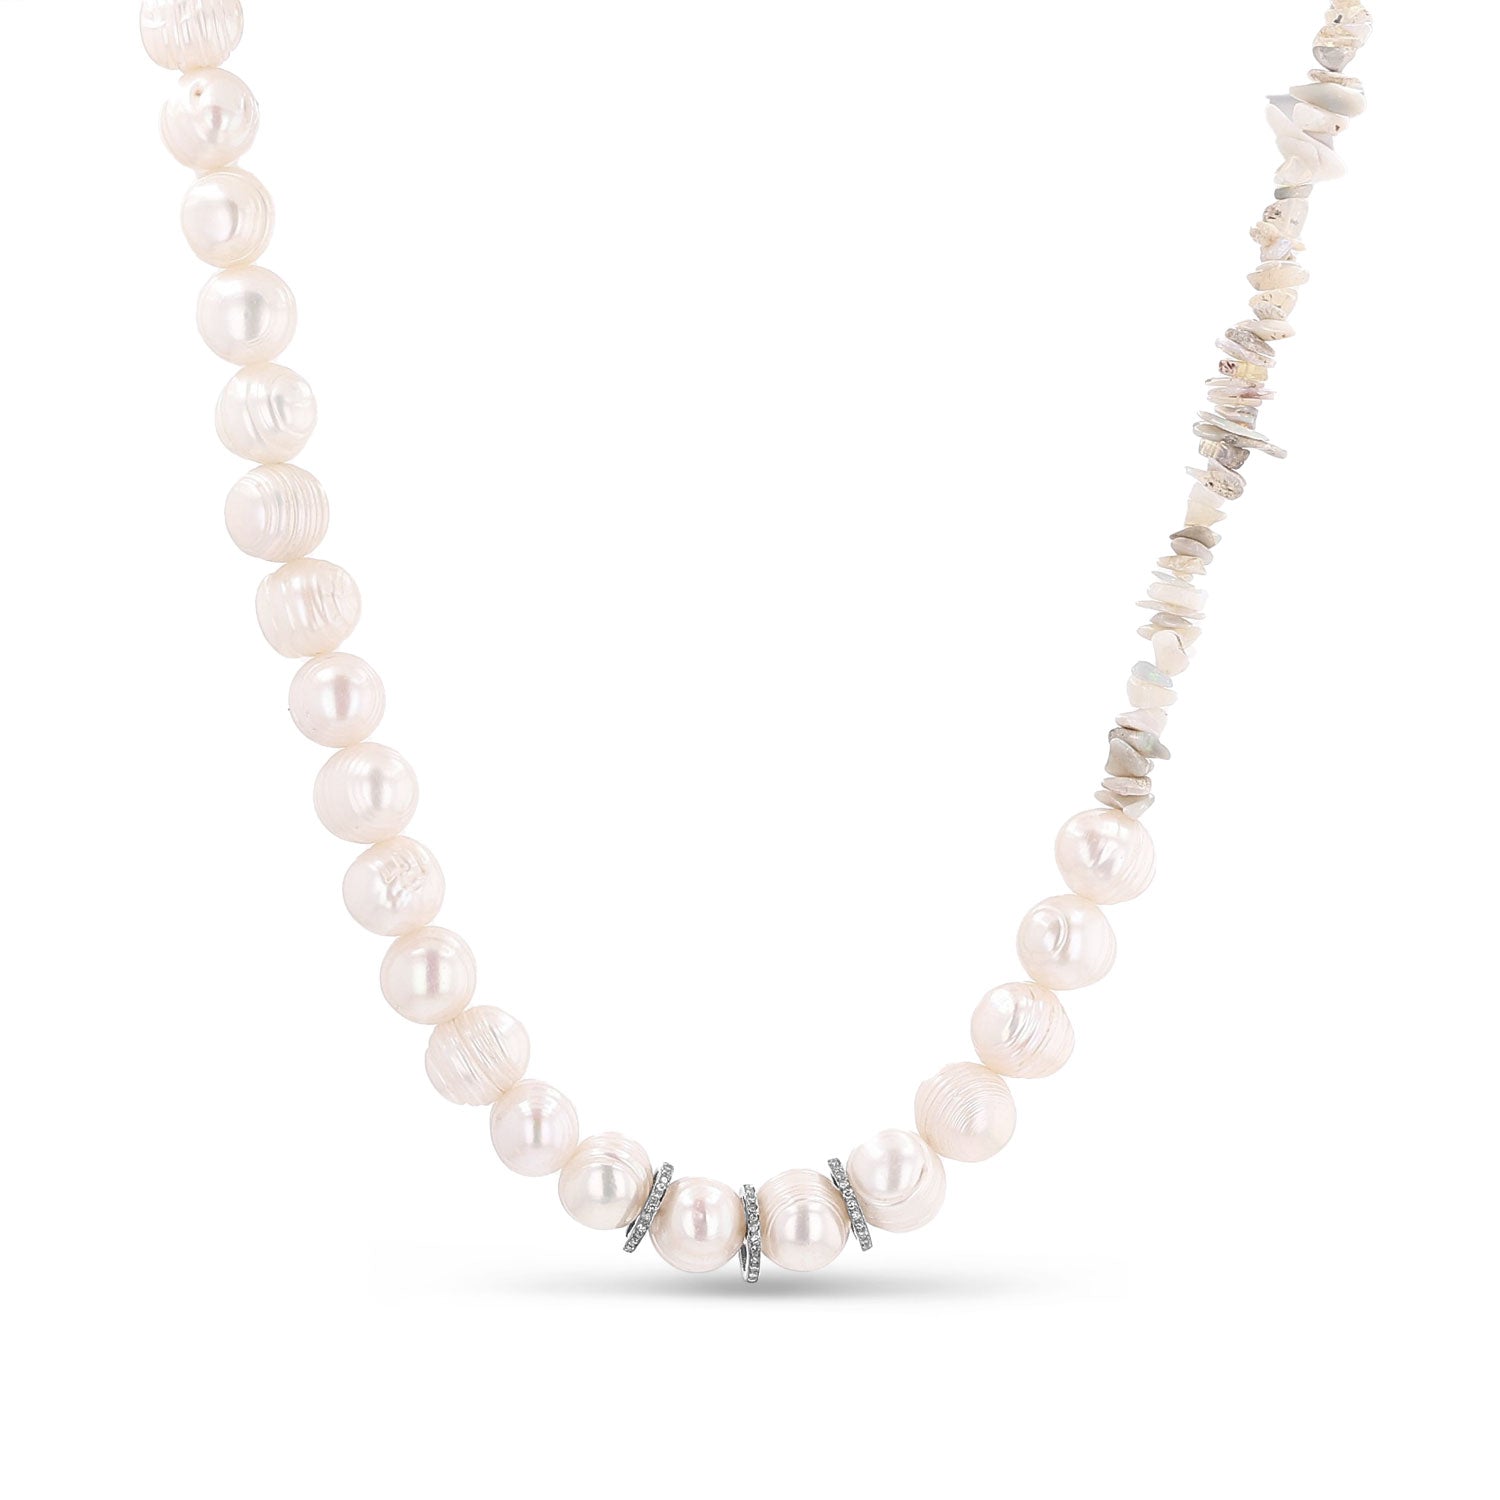 Pearl Bead & Australian Opal Chip Necklace with Three Diamond Rondelles - 18"  N0003432 - TBird